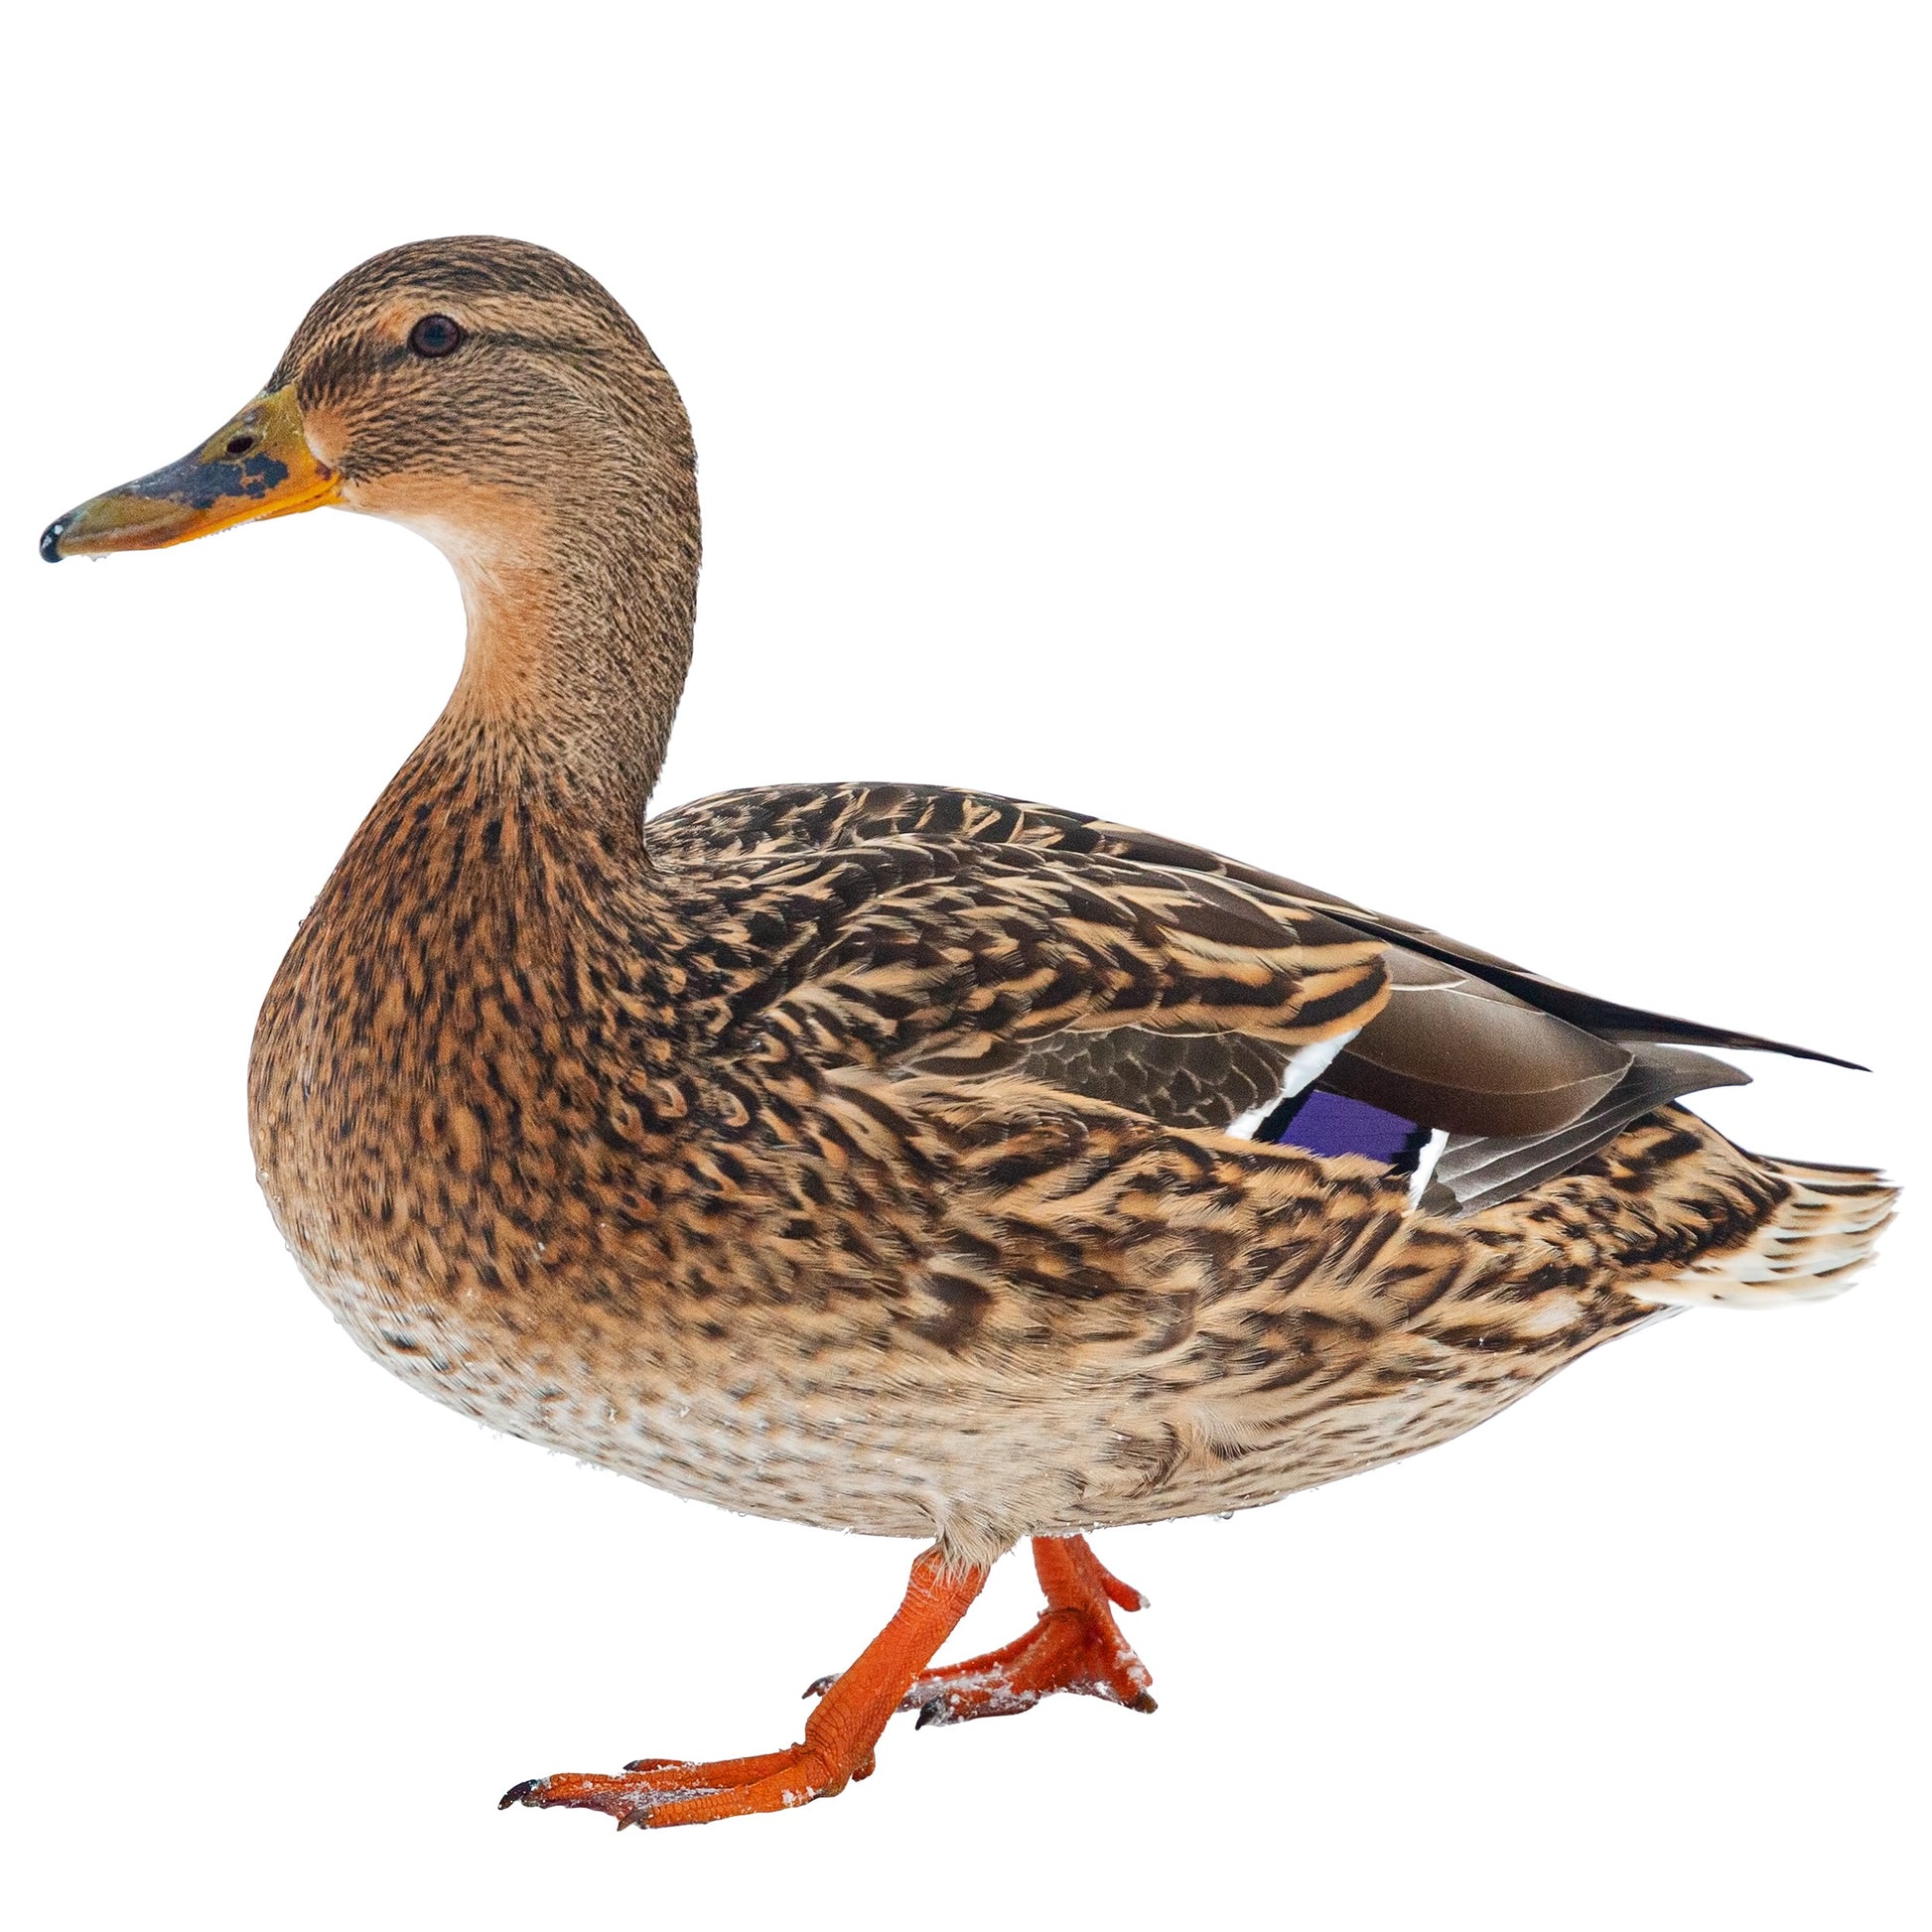 Mallard Ducks are known for their beautiful appearance and graceful presence.